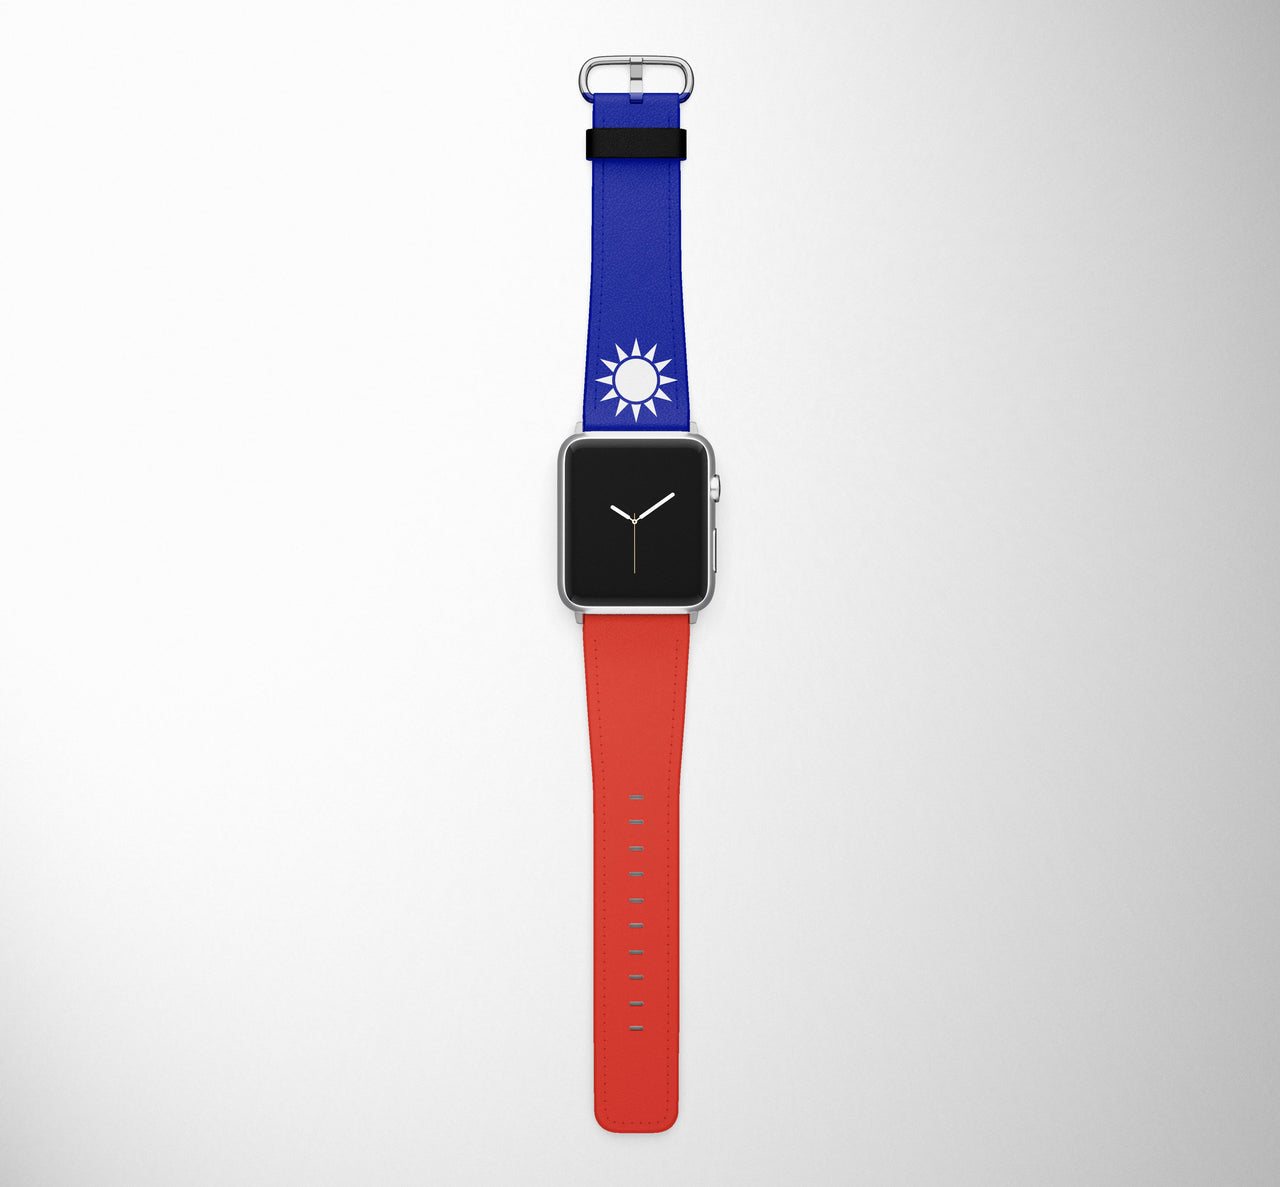 Taiwan Flag Designed Leather Apple Watch Straps